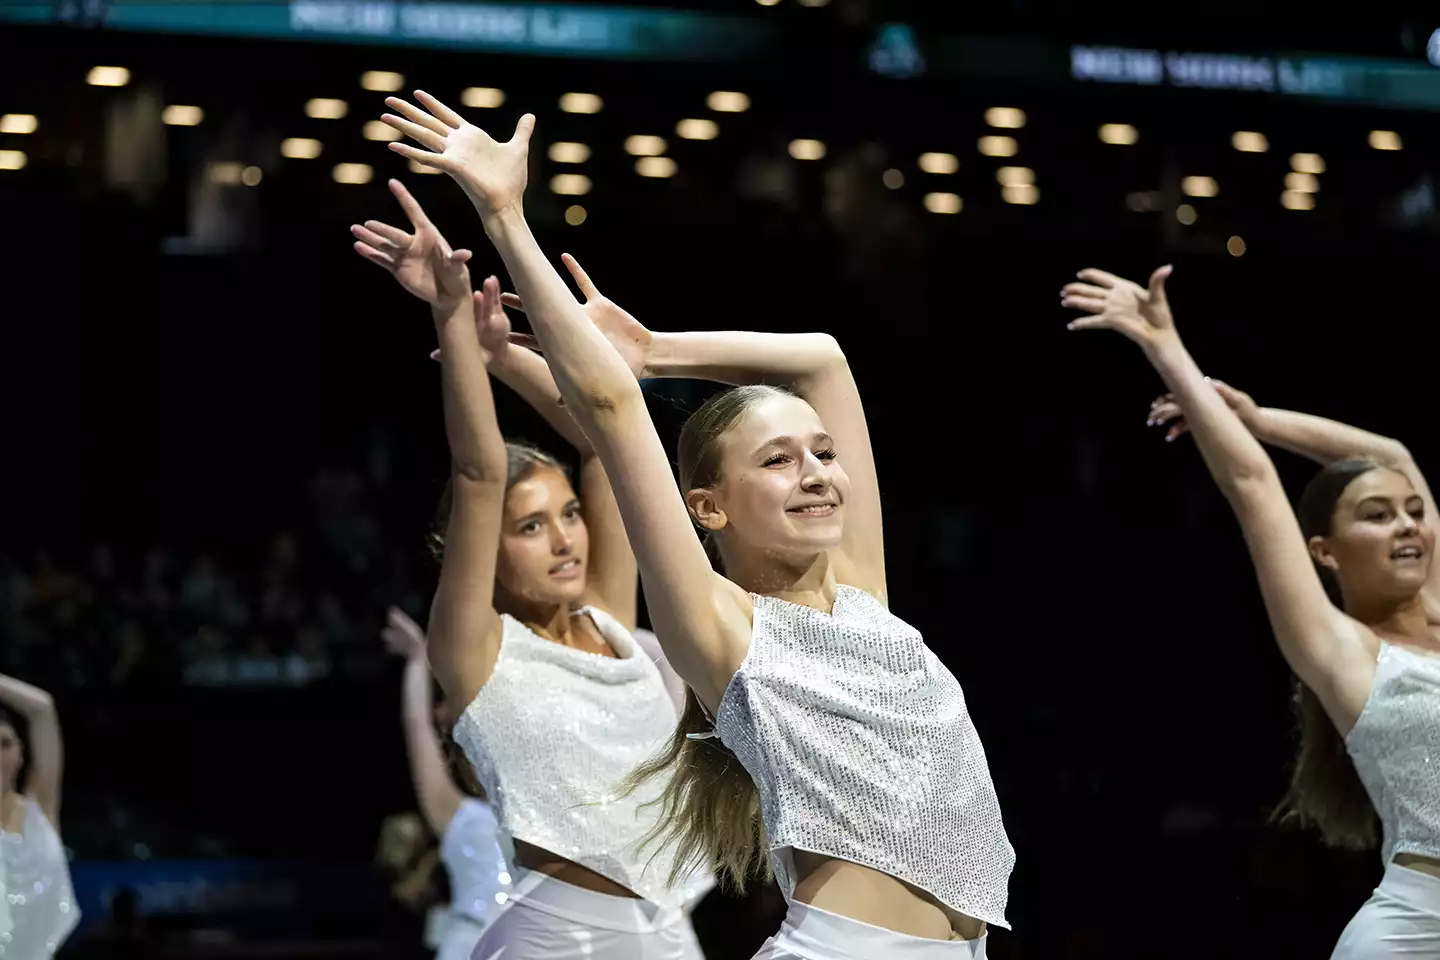 At its heart, dance is a performing art.  For this reason, we seek out opportunities for our dance companies to perform all over our amazing city ... including at NBA & WNBA games at the Barclays Center and Madison Square Garden!